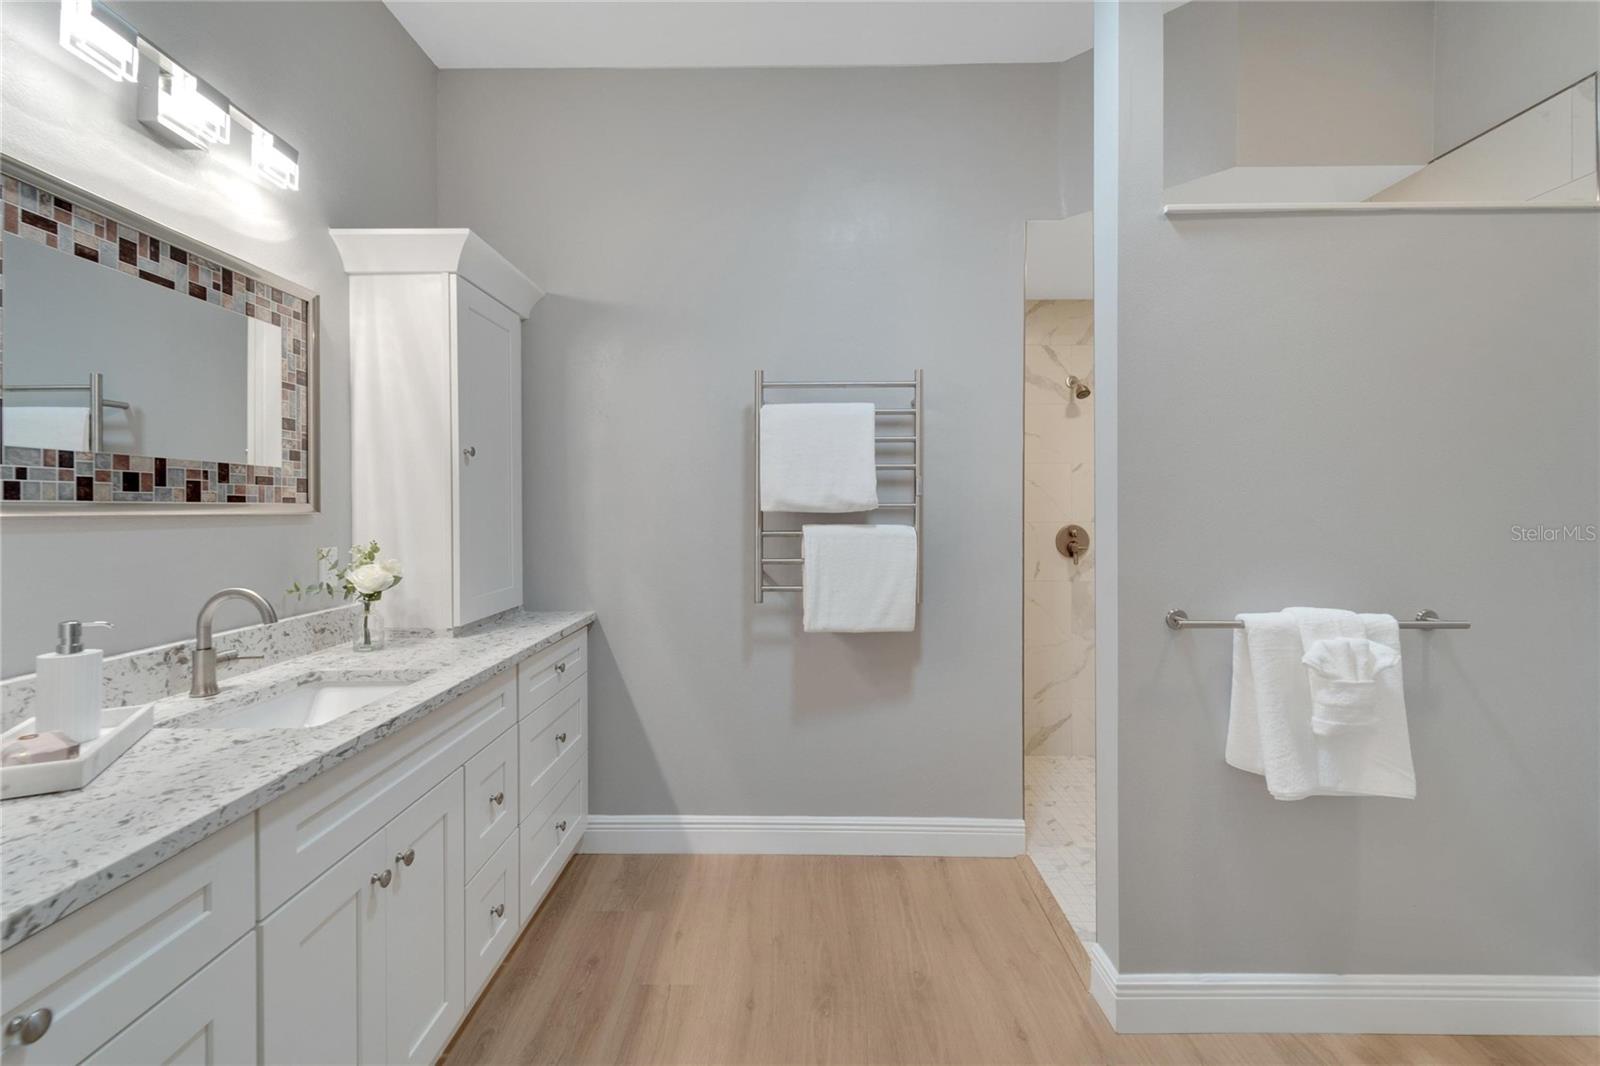 Primary Bathroom with Shaker style cabinetry with soft close doors and drawers, quartz countertops, built in electric for your hair dryer, toothbrush, shaver.